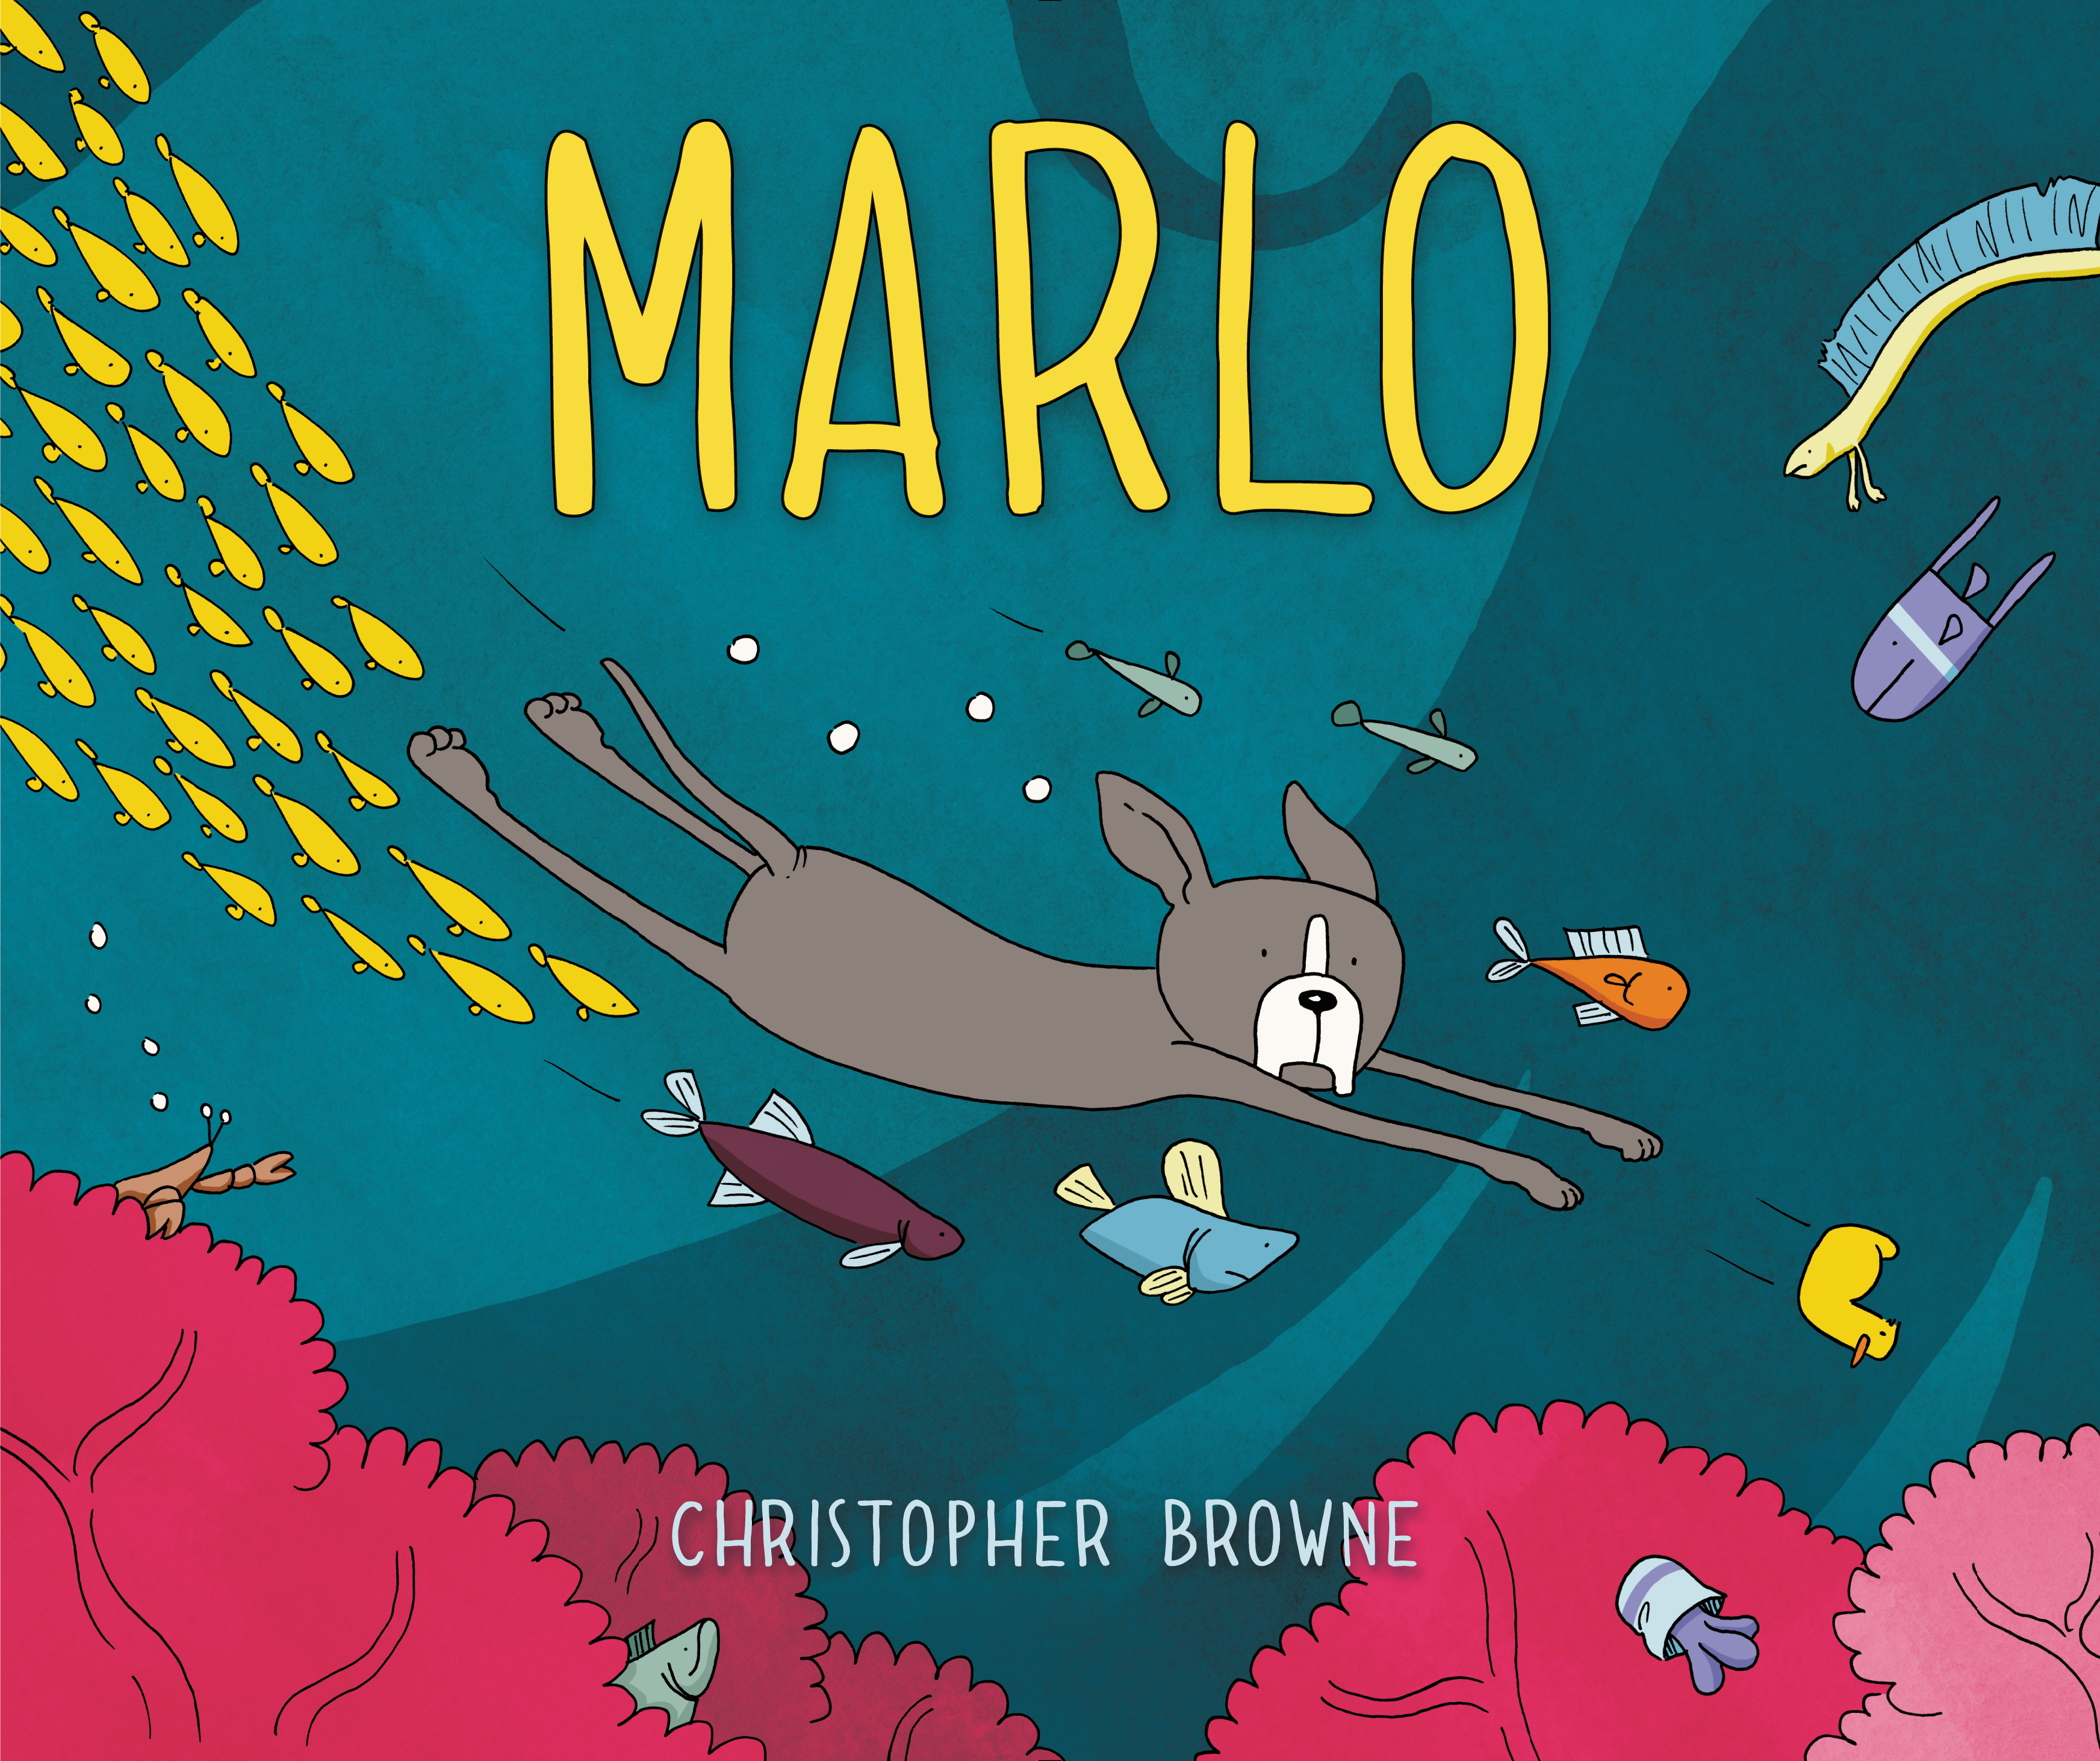 Sunday Story Time with Christopher Browne (author and illustrator of Marlo)